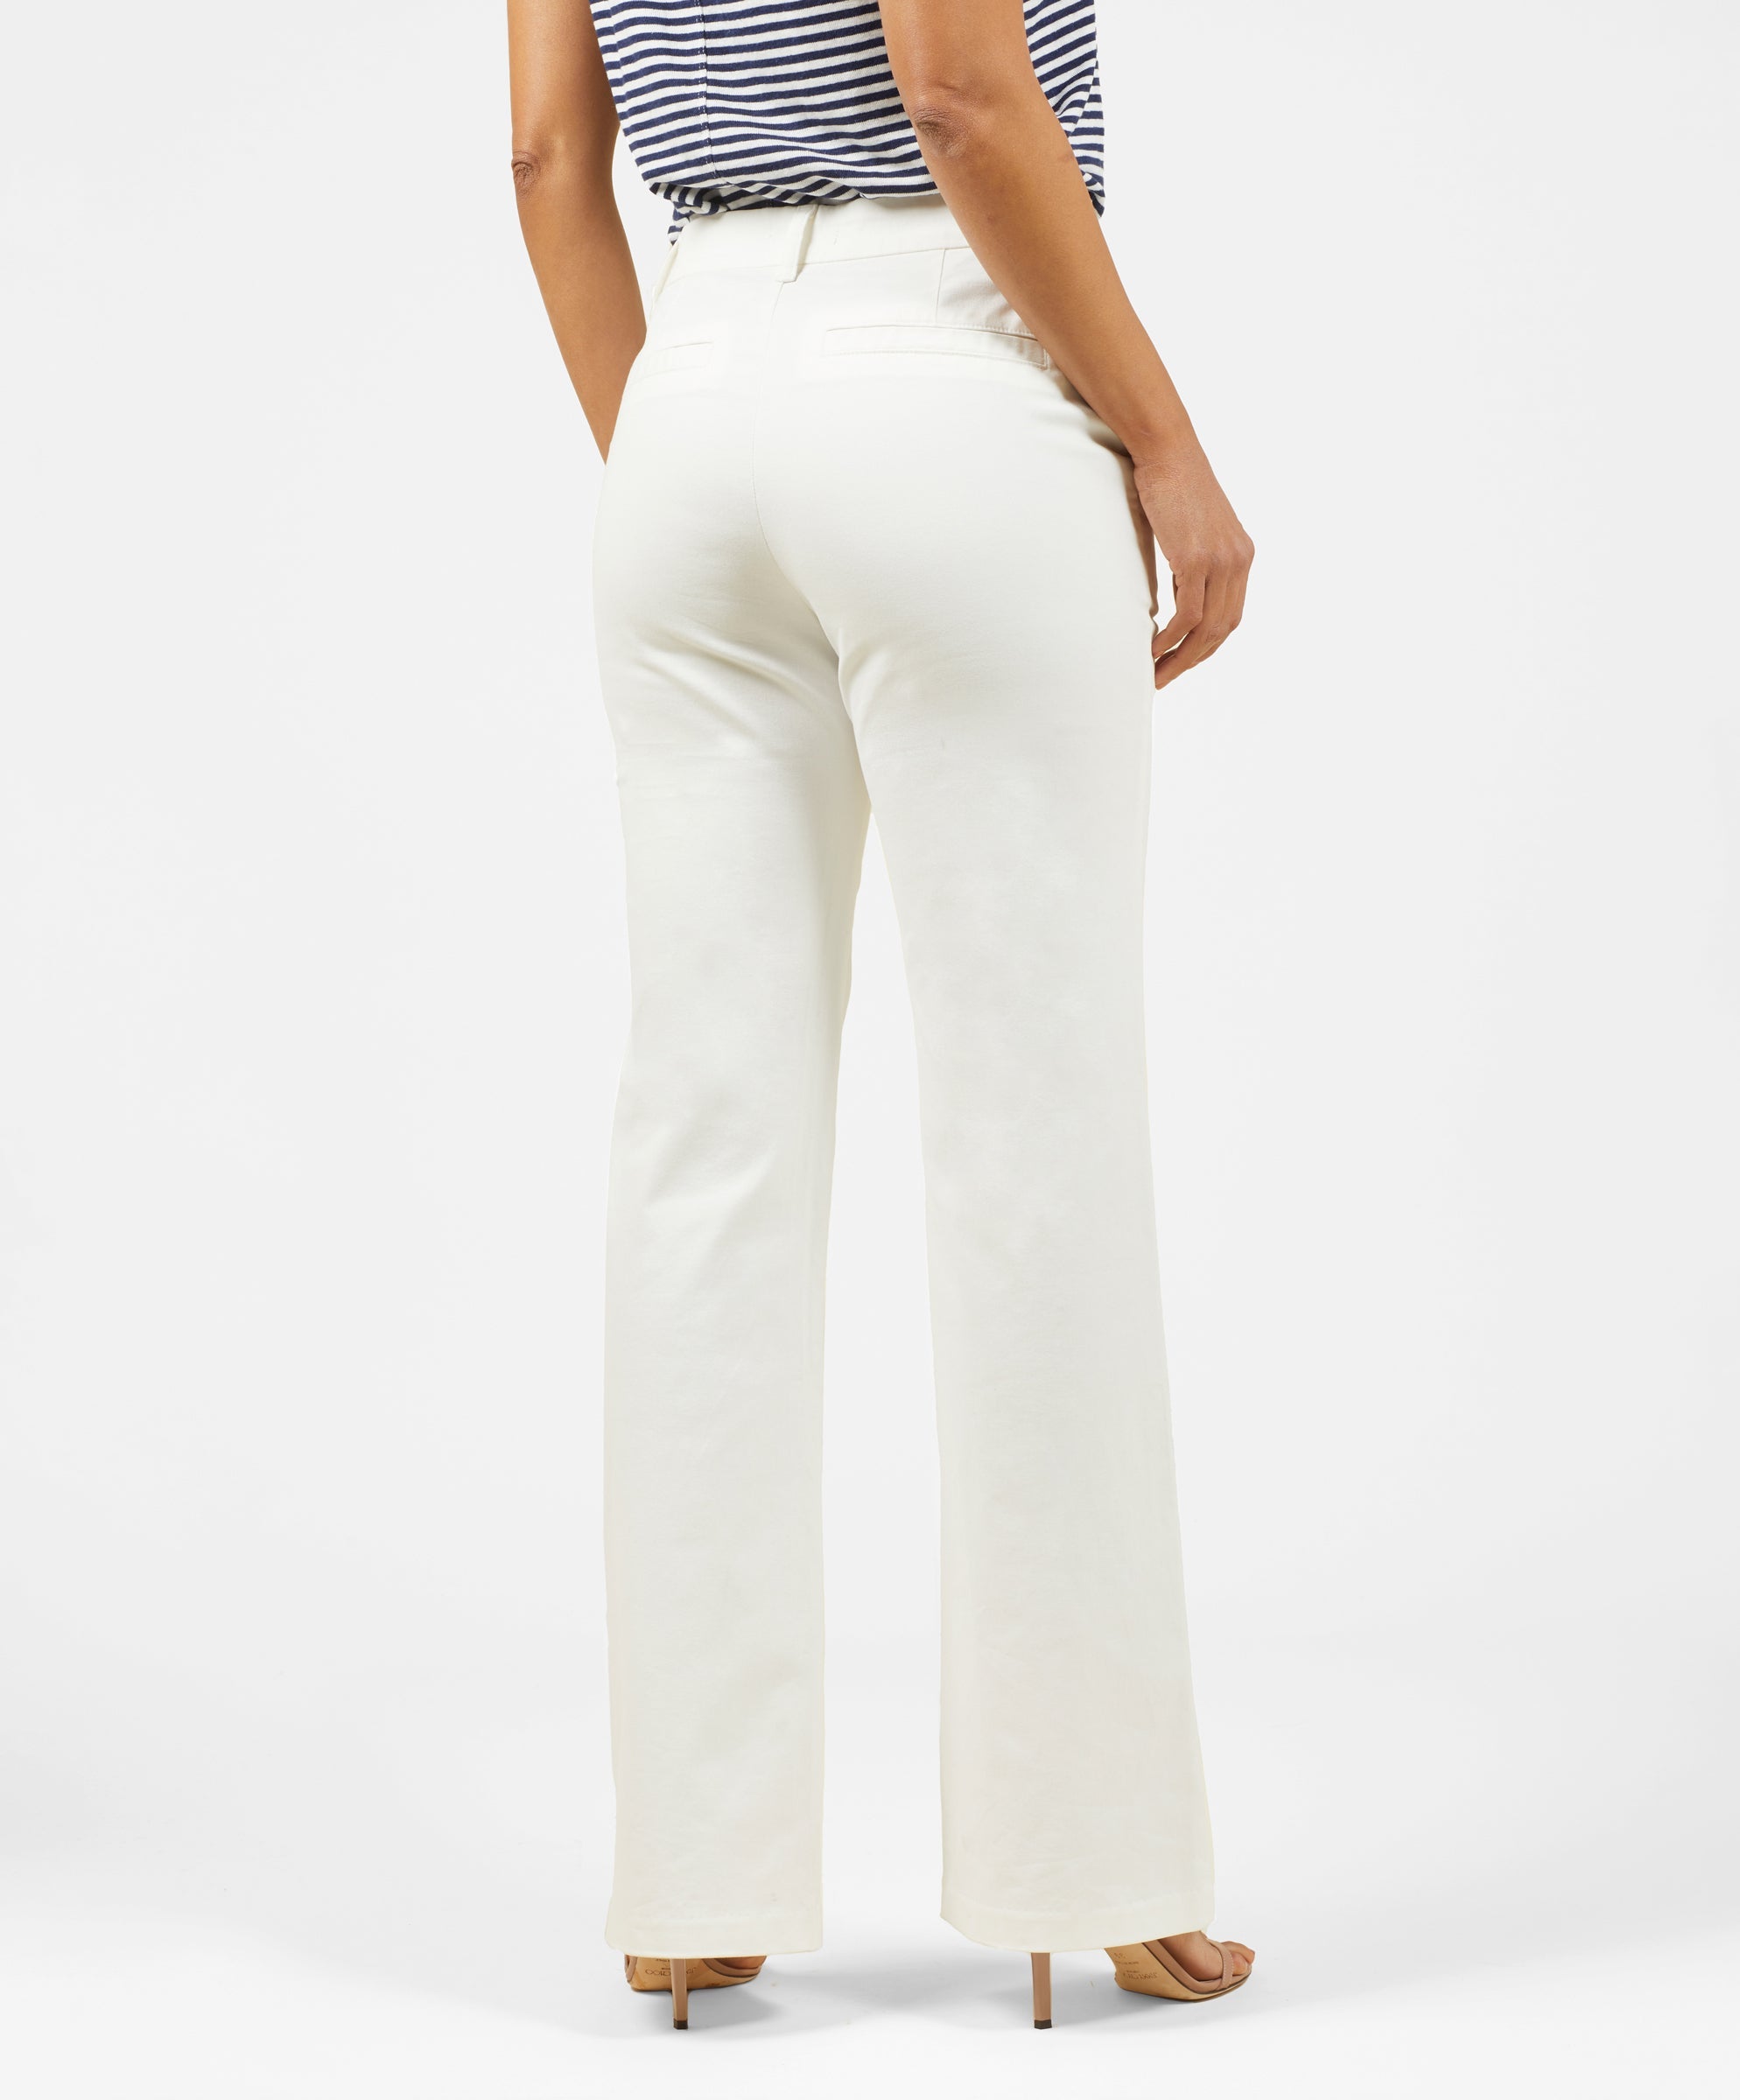 Avery Stretch Trousers | Women's Pants | Outerknown